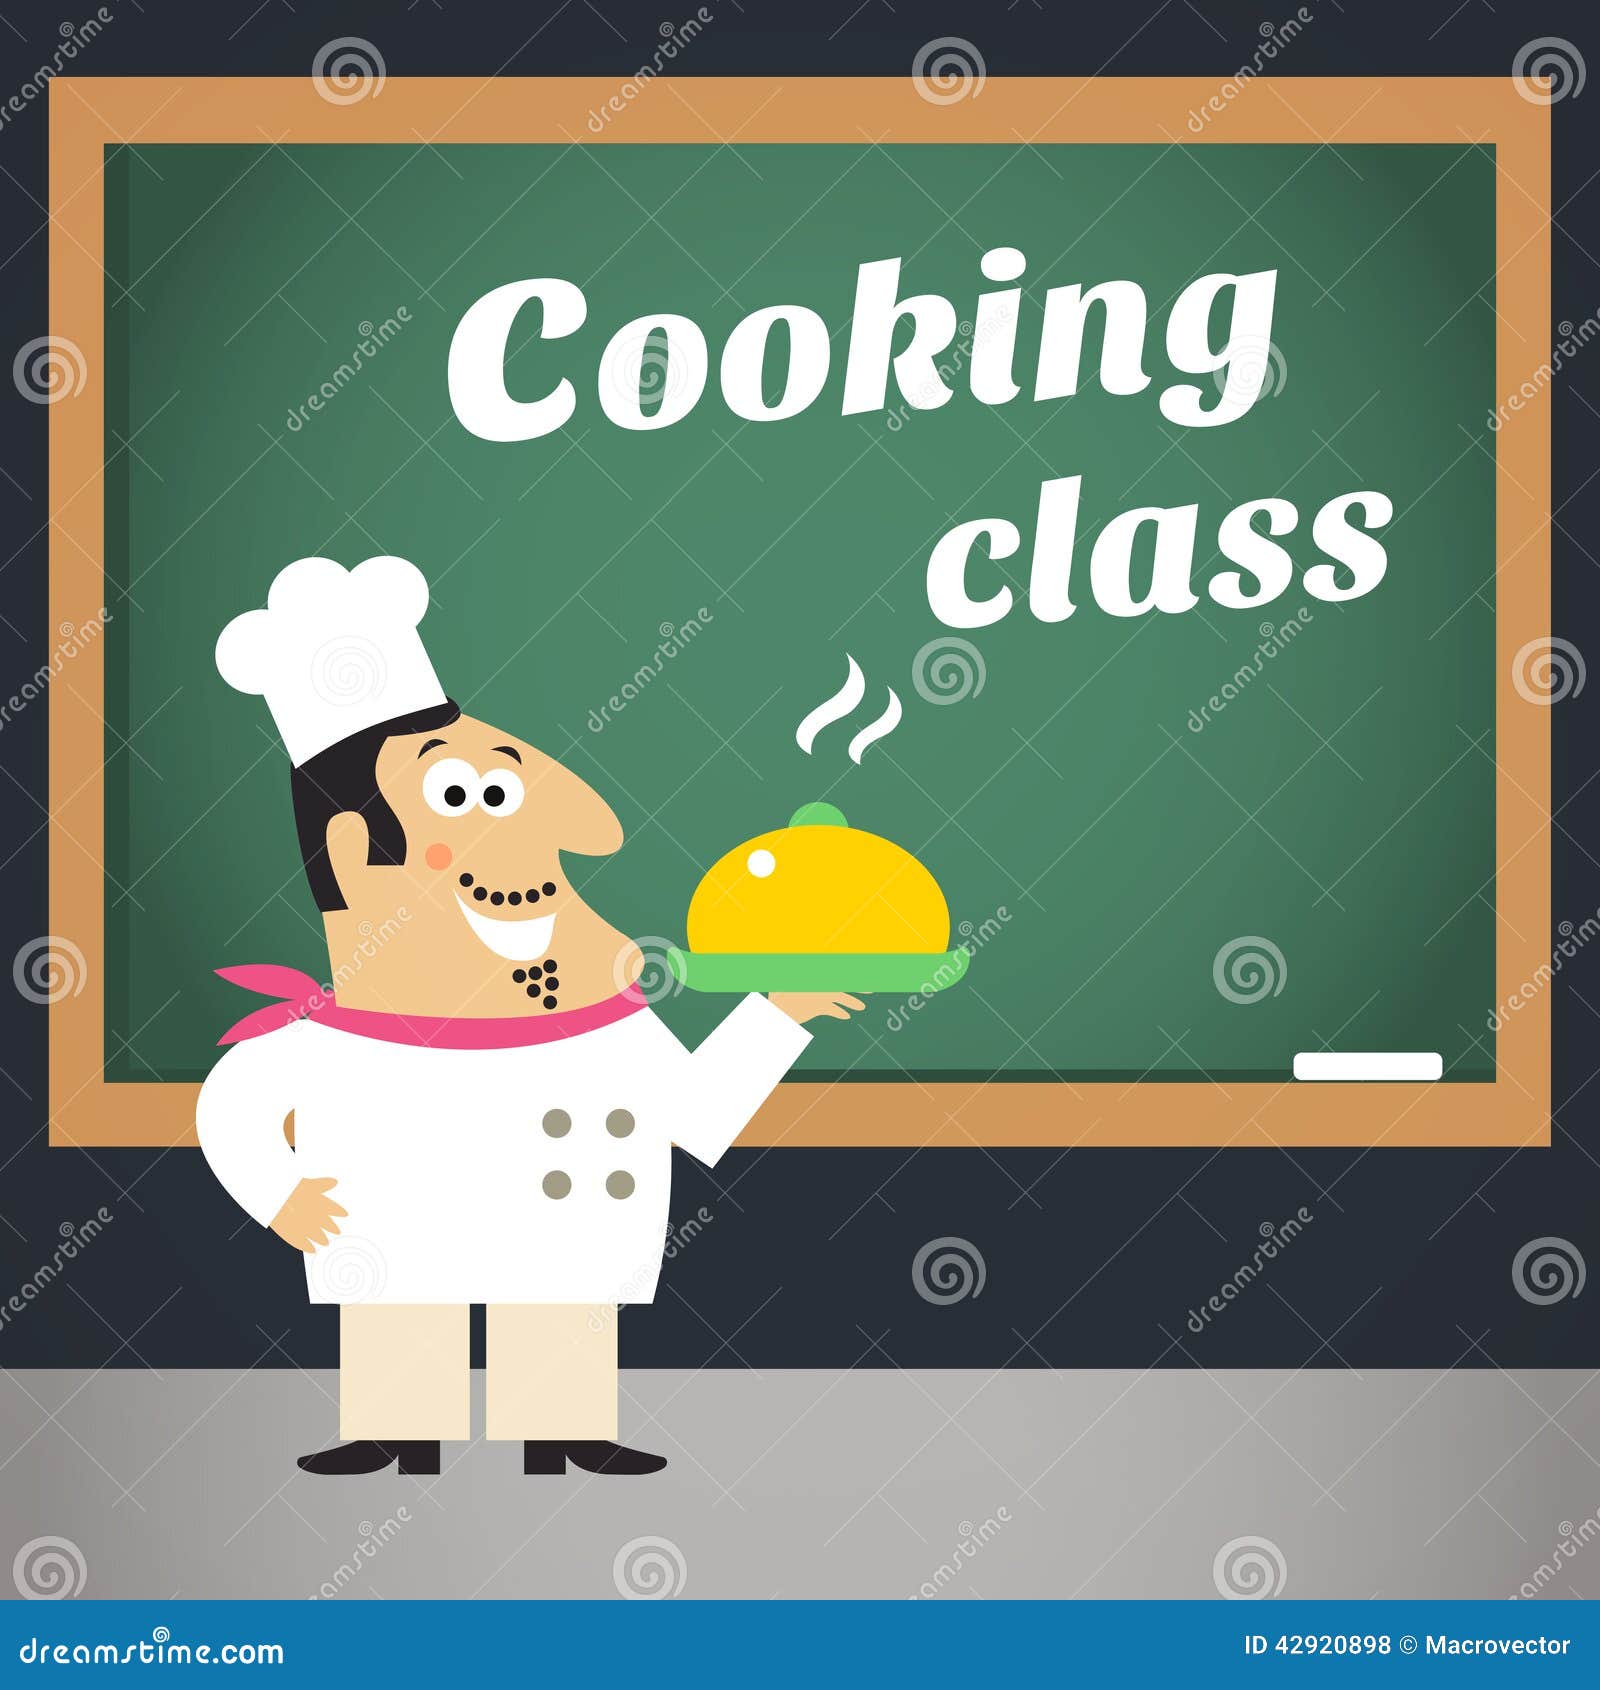 clipart cooking class - photo #38